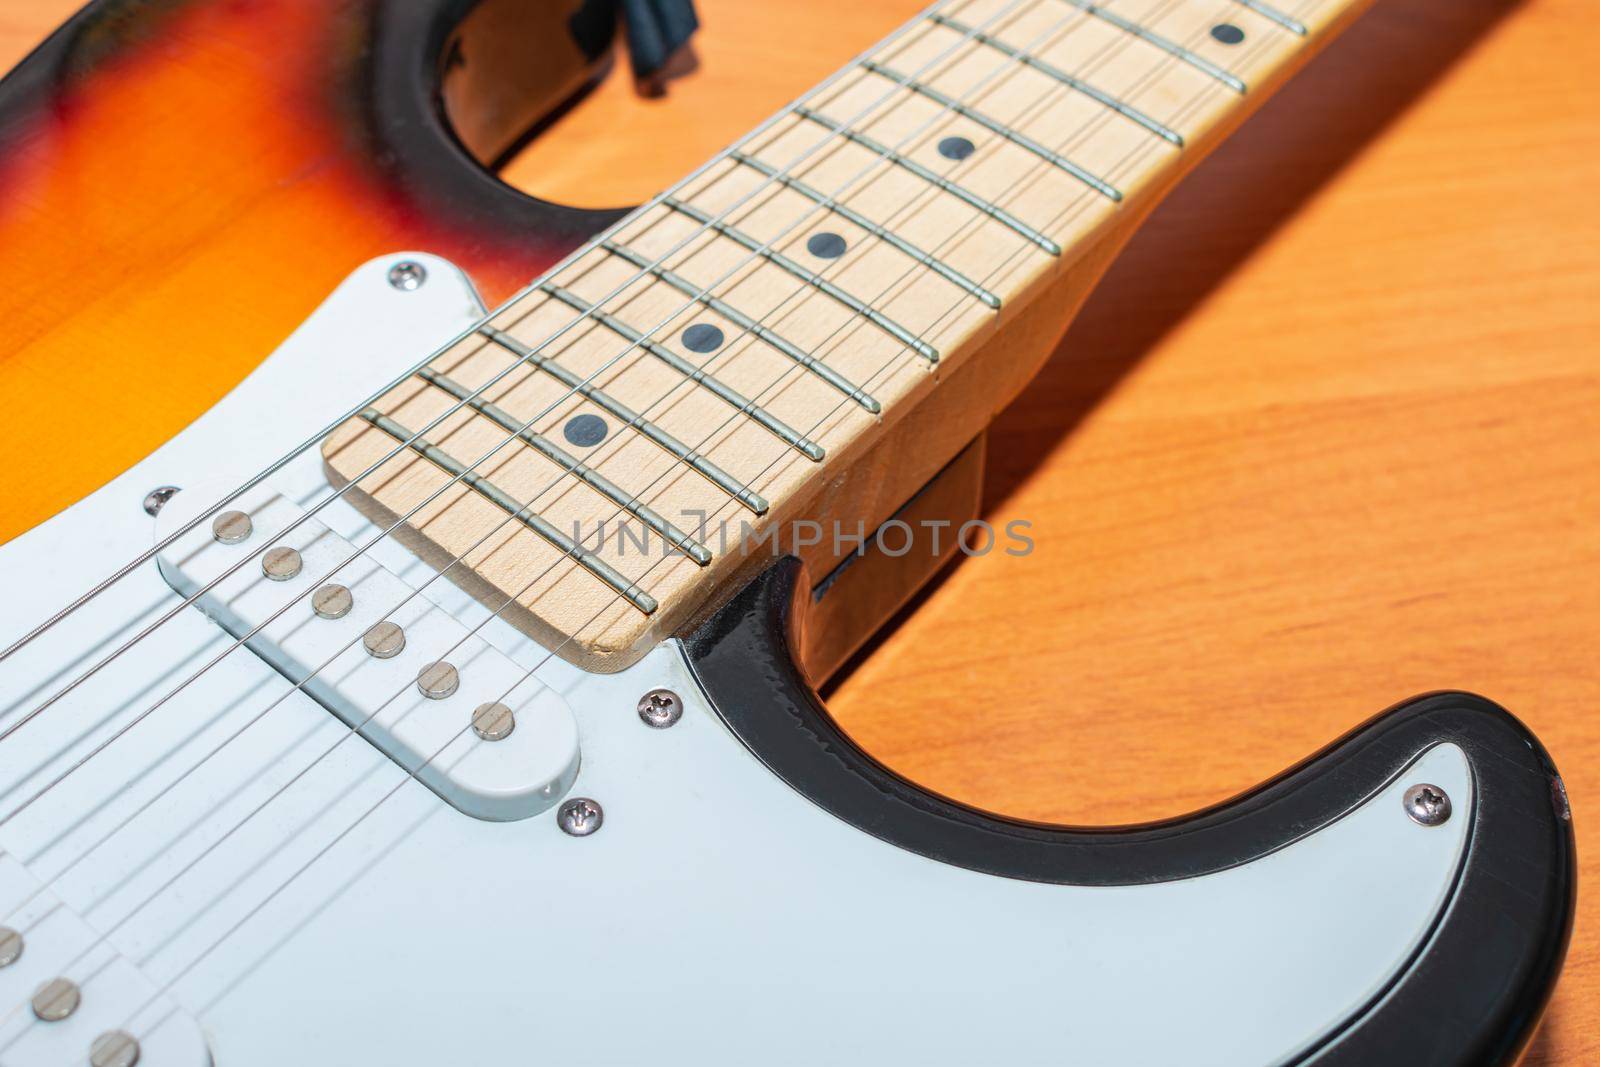 Electric guitar close-up, string body and fretboard